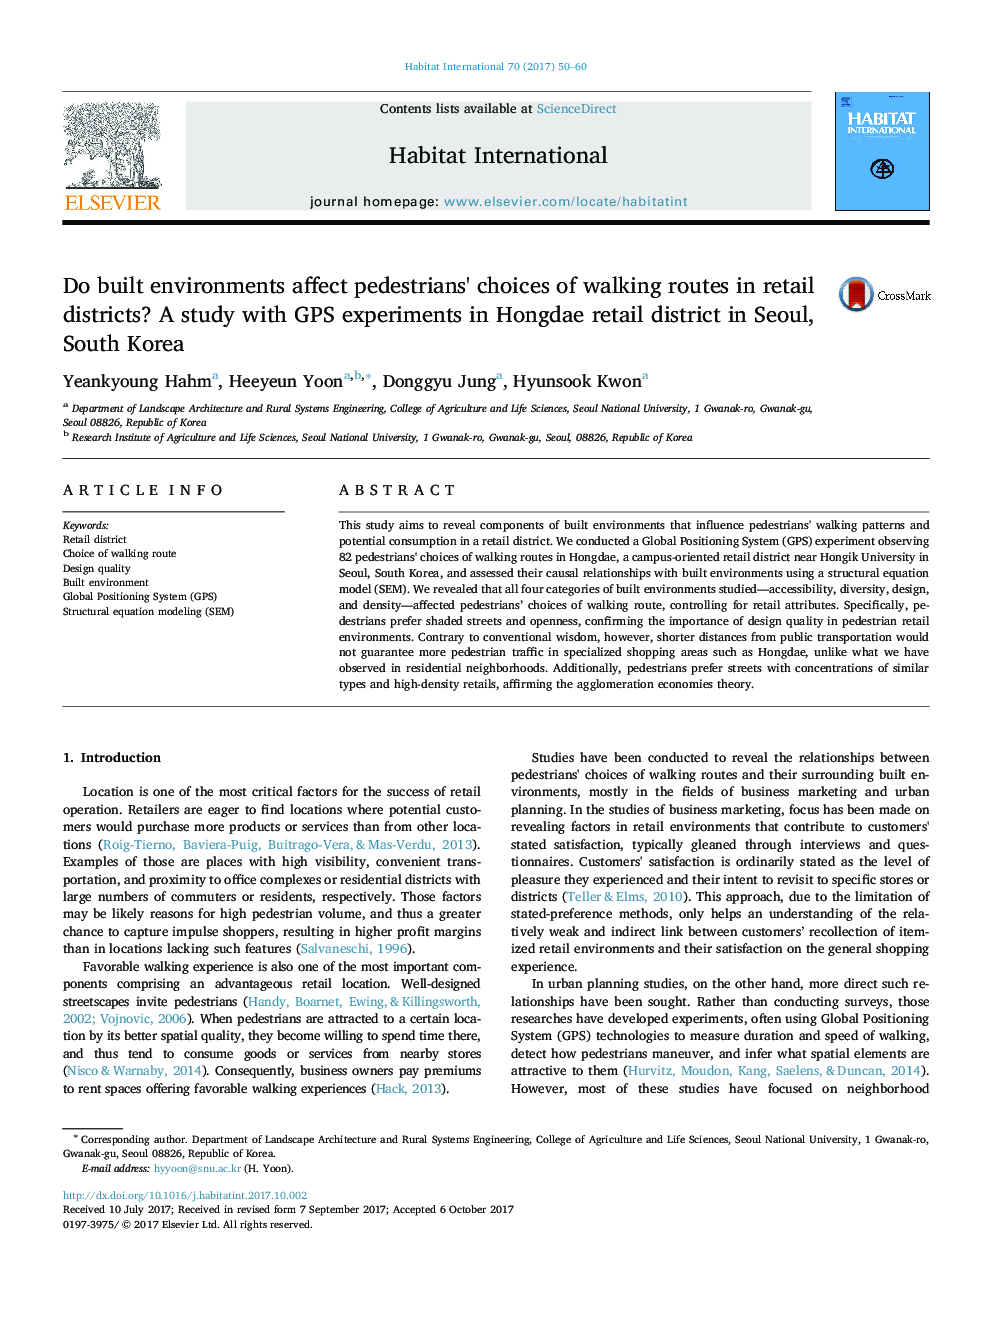 Do built environments affect pedestrians' choices of walking routes in retail districts? A study with GPS experiments in Hongdae retail district in Seoul, South Korea